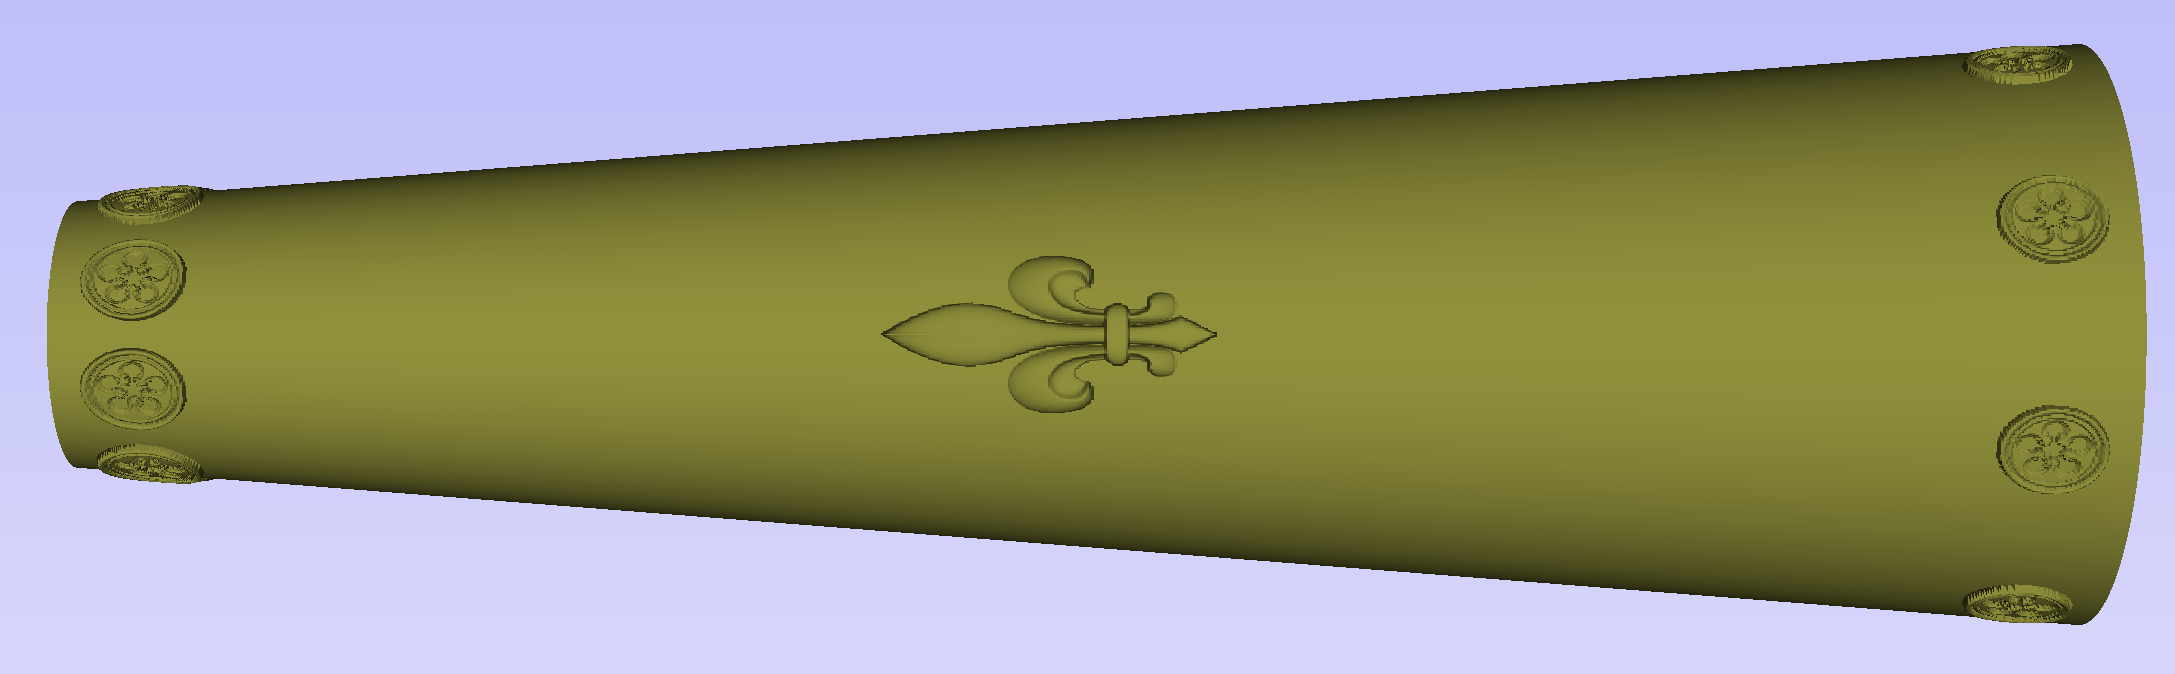 Tapered column with clipart stretched to overcome distortion